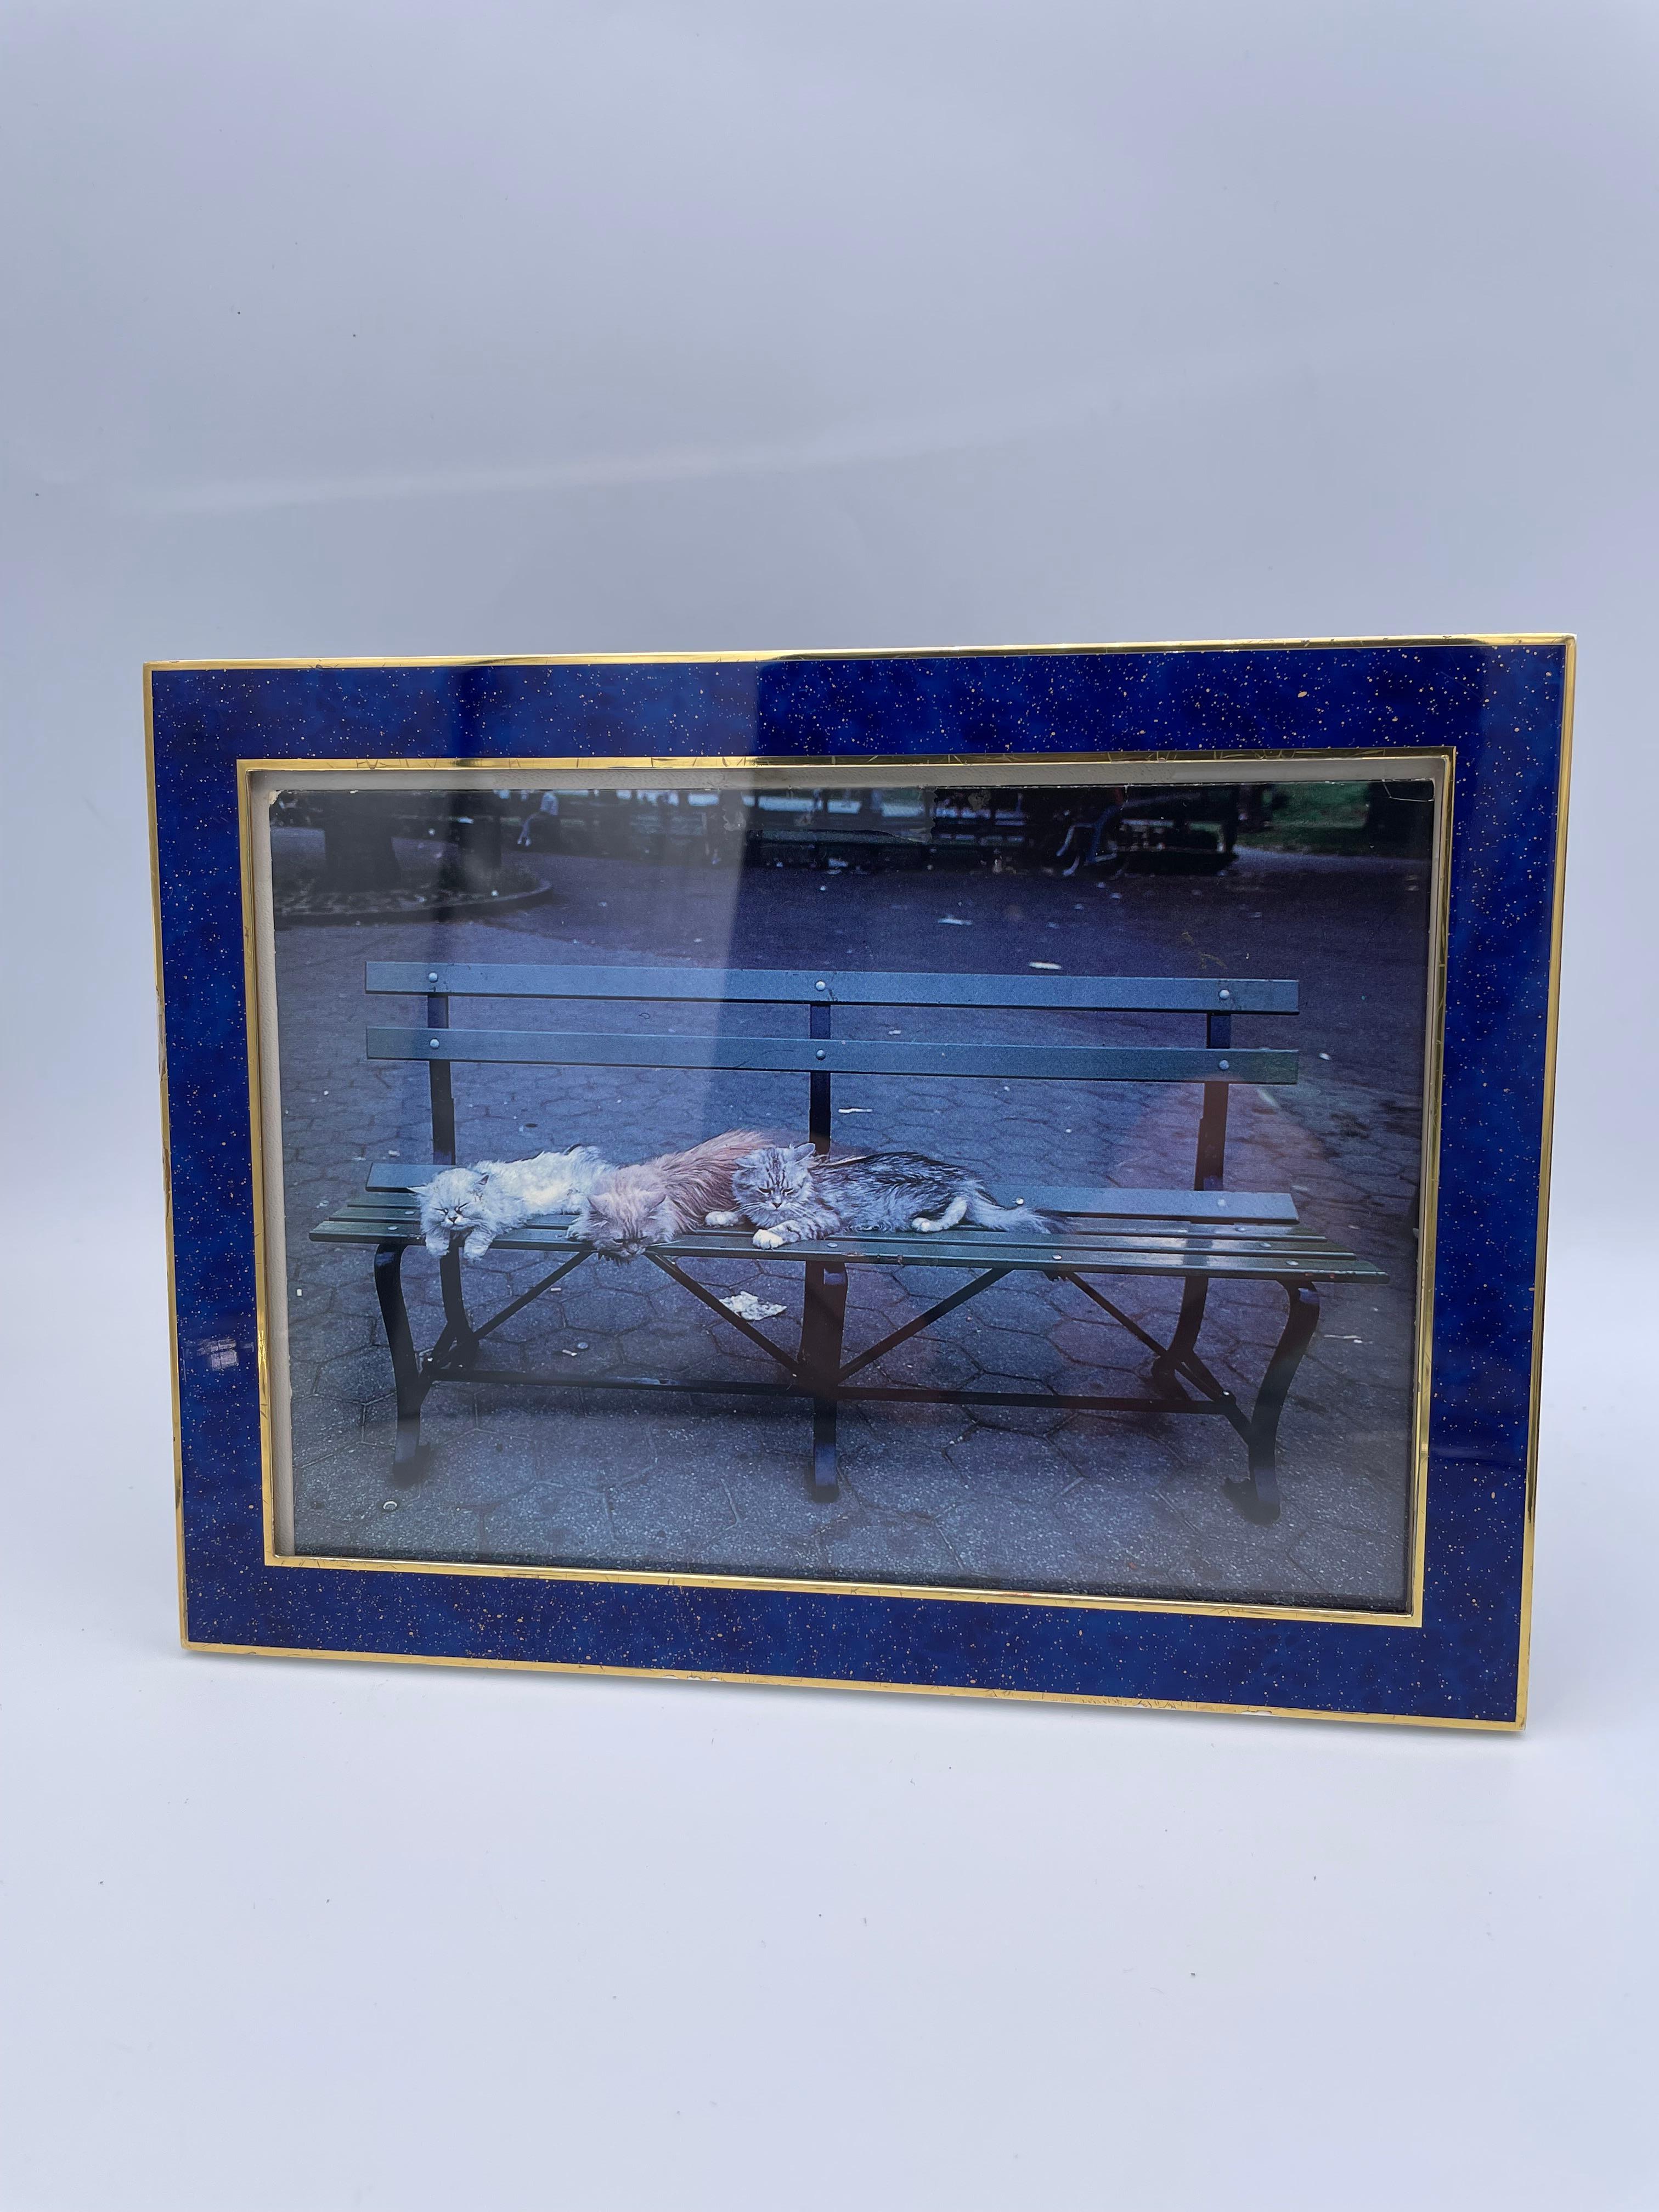 Outstanding enamel picture frame. Made by Puiforcat. A rich intense sapphire blue enamel, flecked with gold. Gives the appearance of lapis lazuli. Set between outside and inside borders of bright gilt metal. Heavy gauge. Overall size is 8